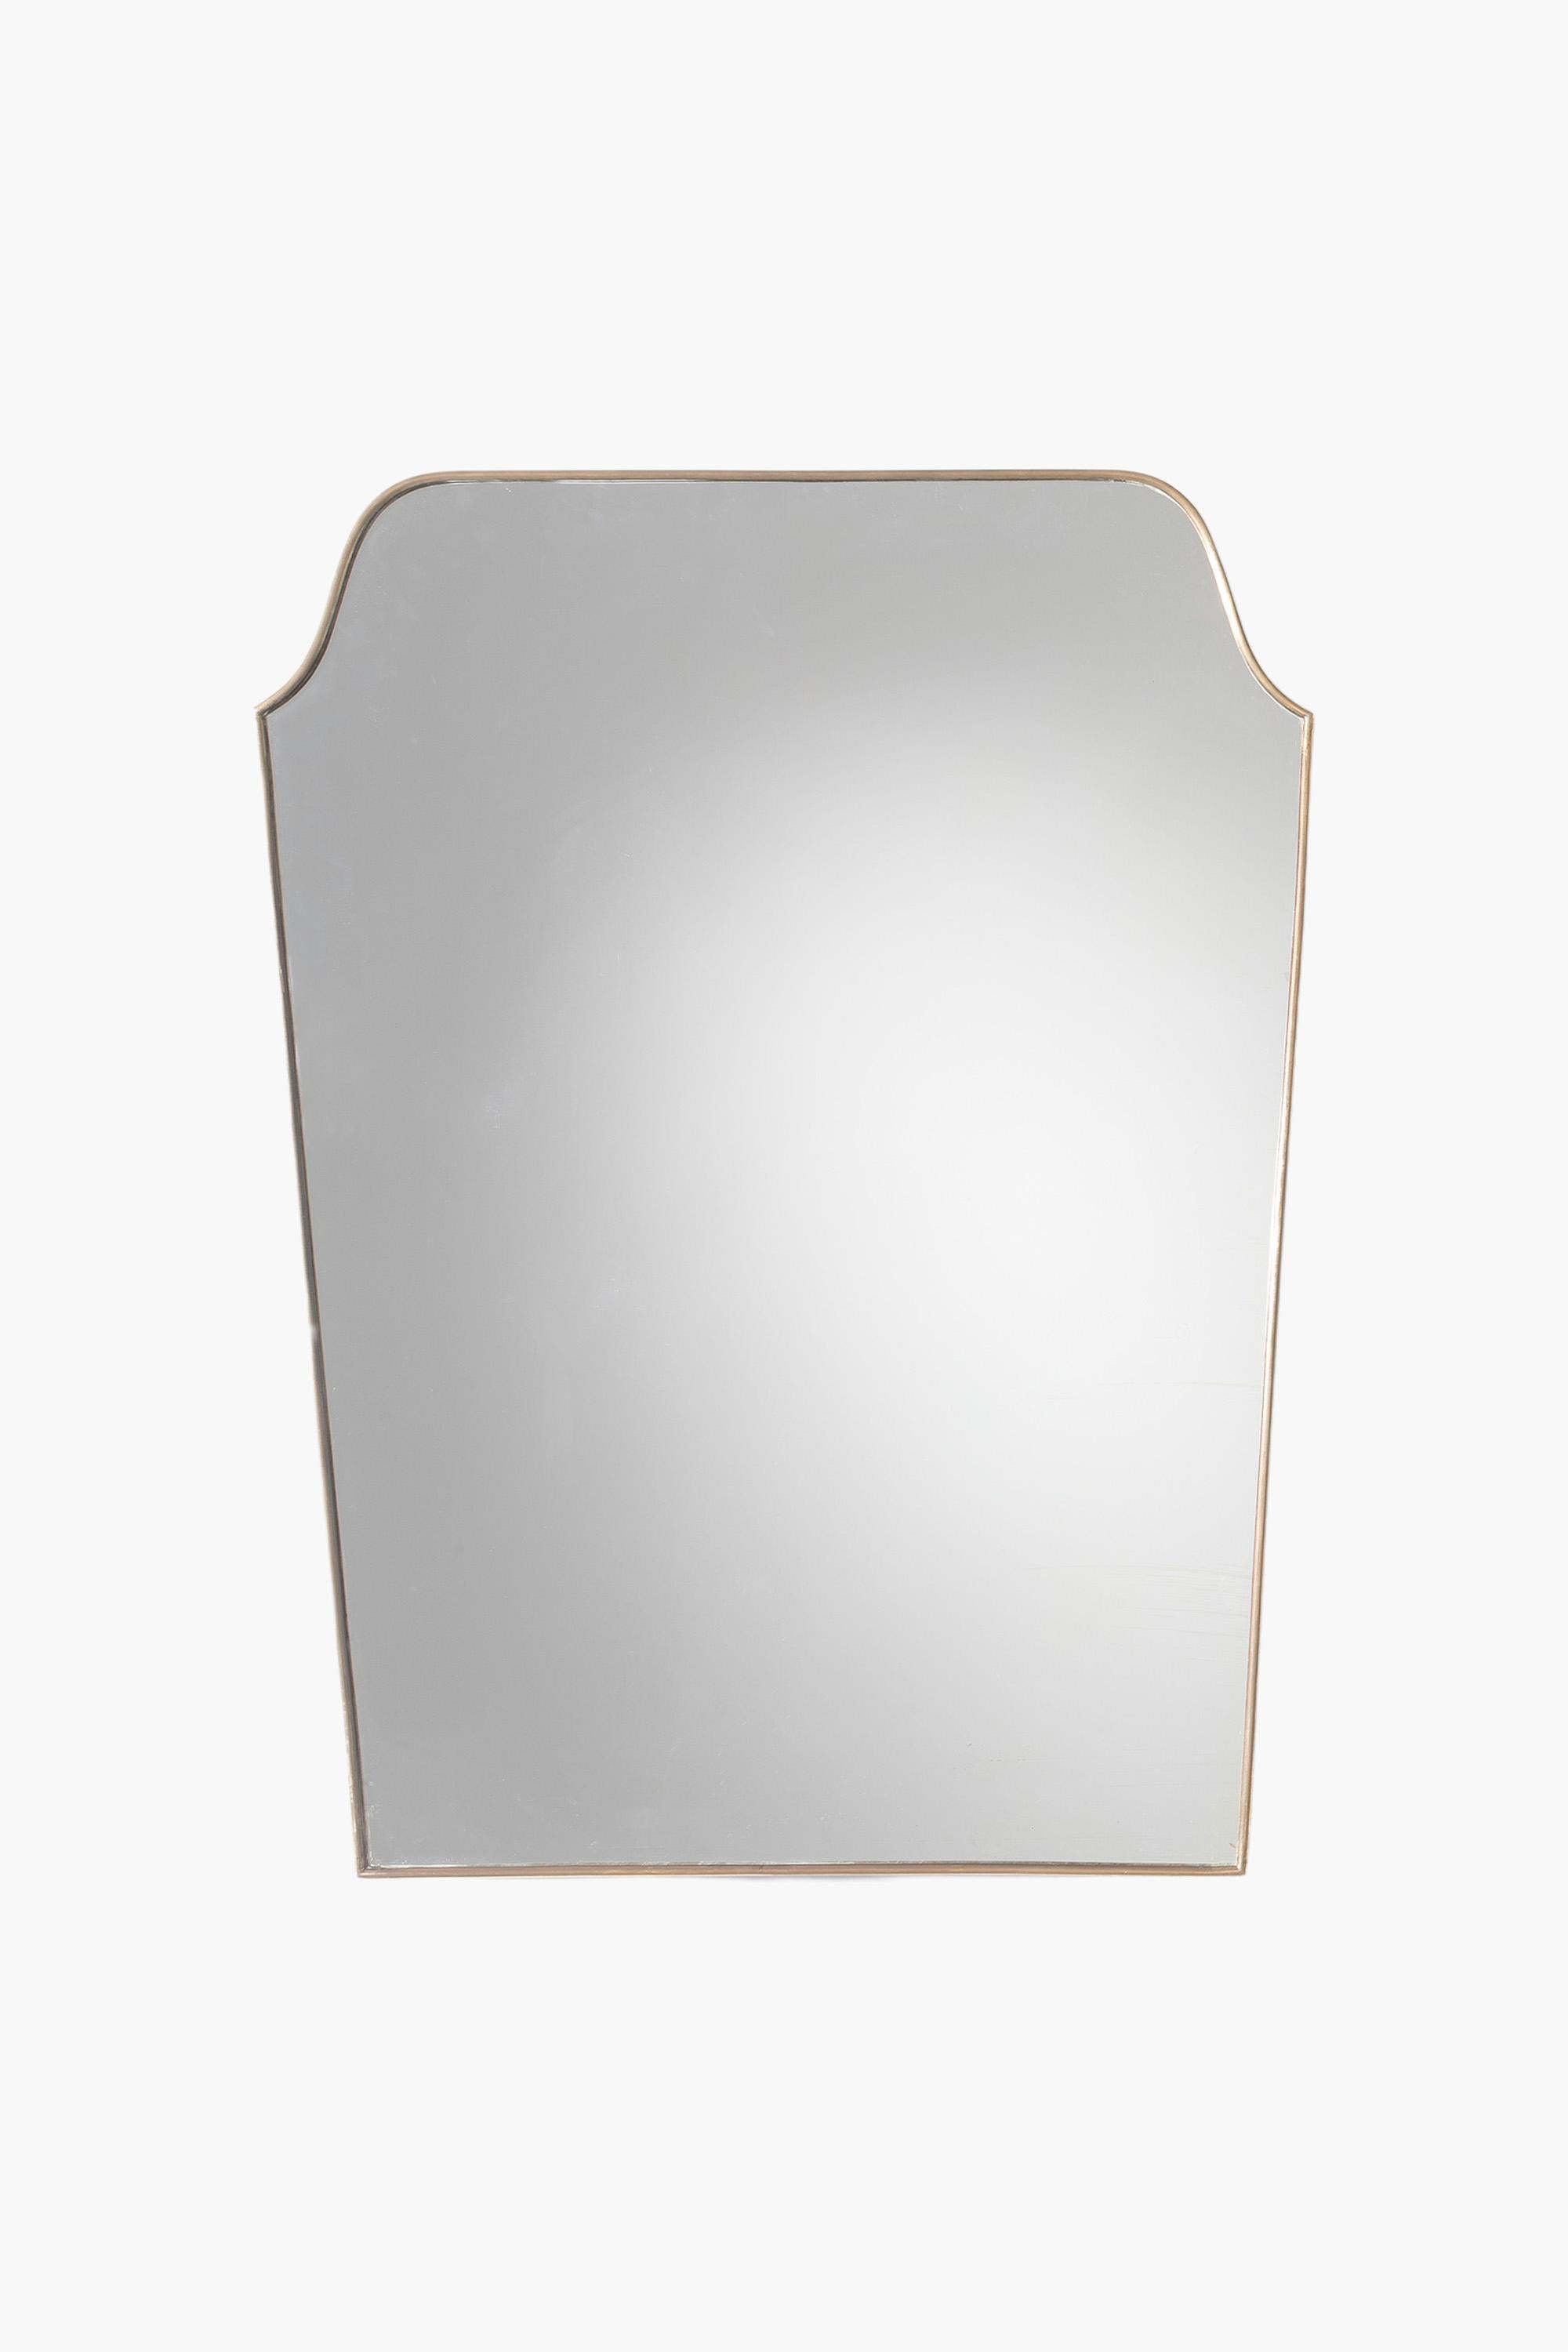 Large 1950s Italian Brass Framed Mirror In Good Condition For Sale In London, GB